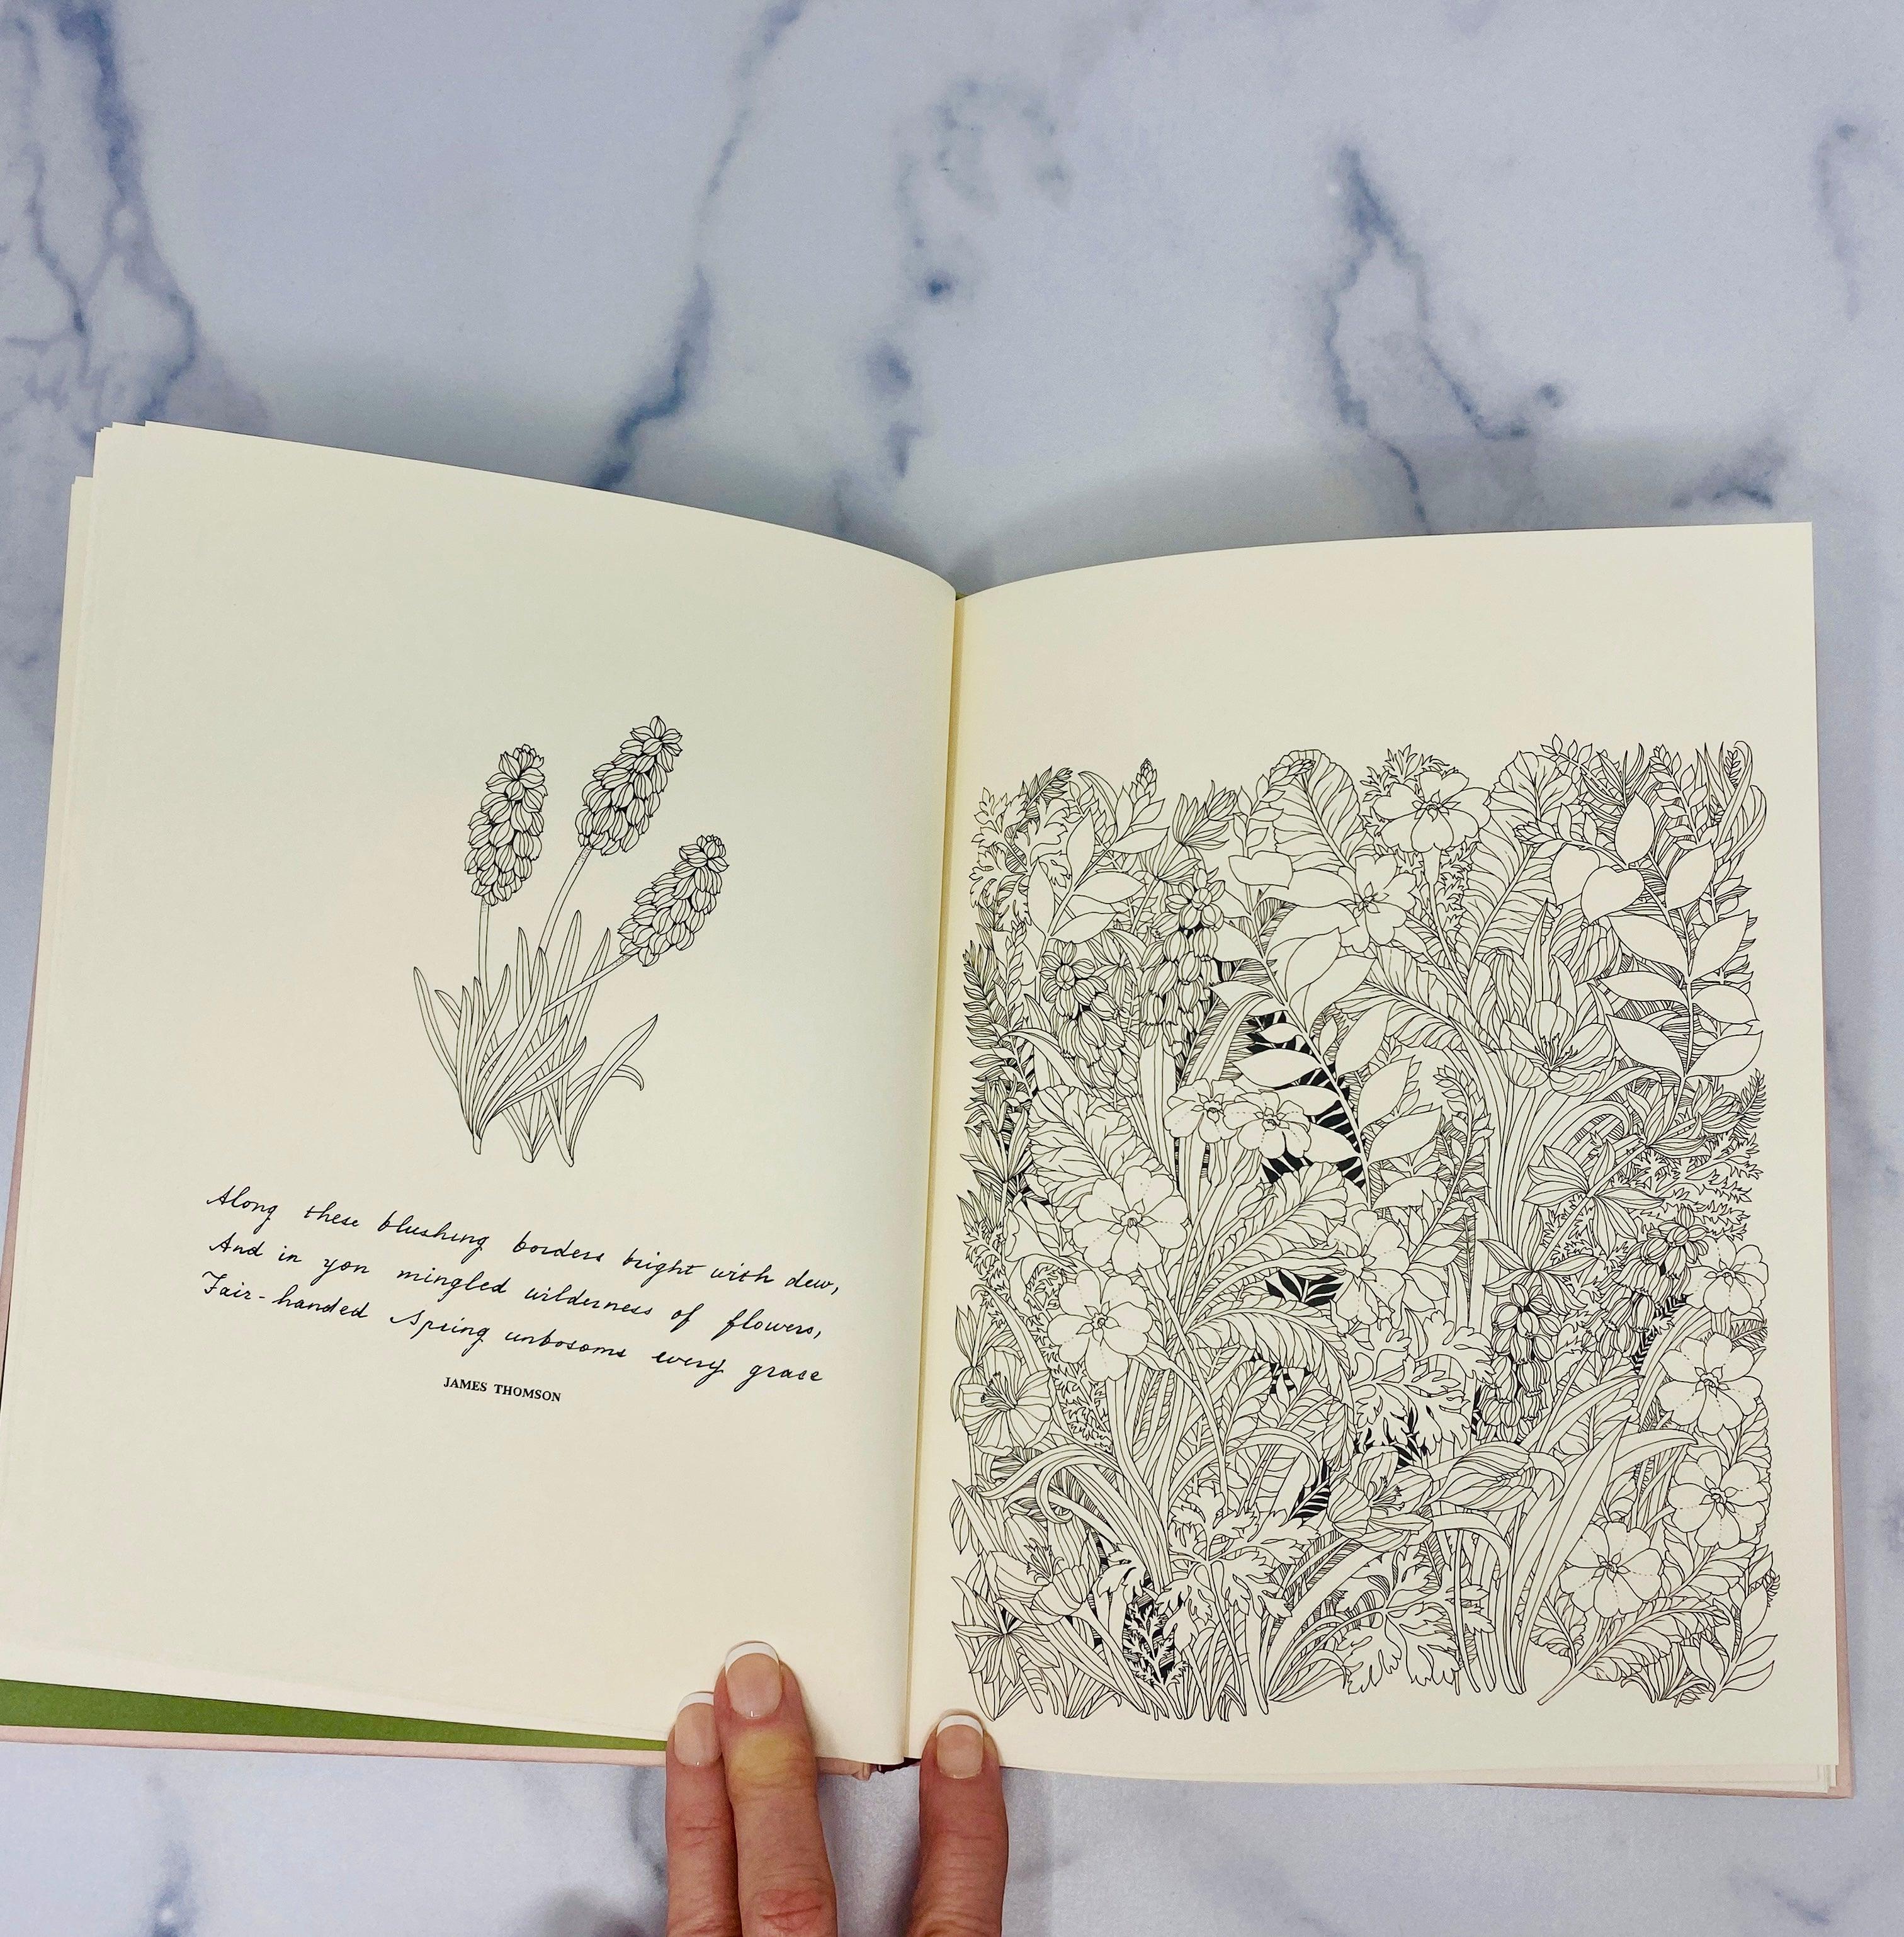 The Flower Year Coloring Book - Vintage Soul